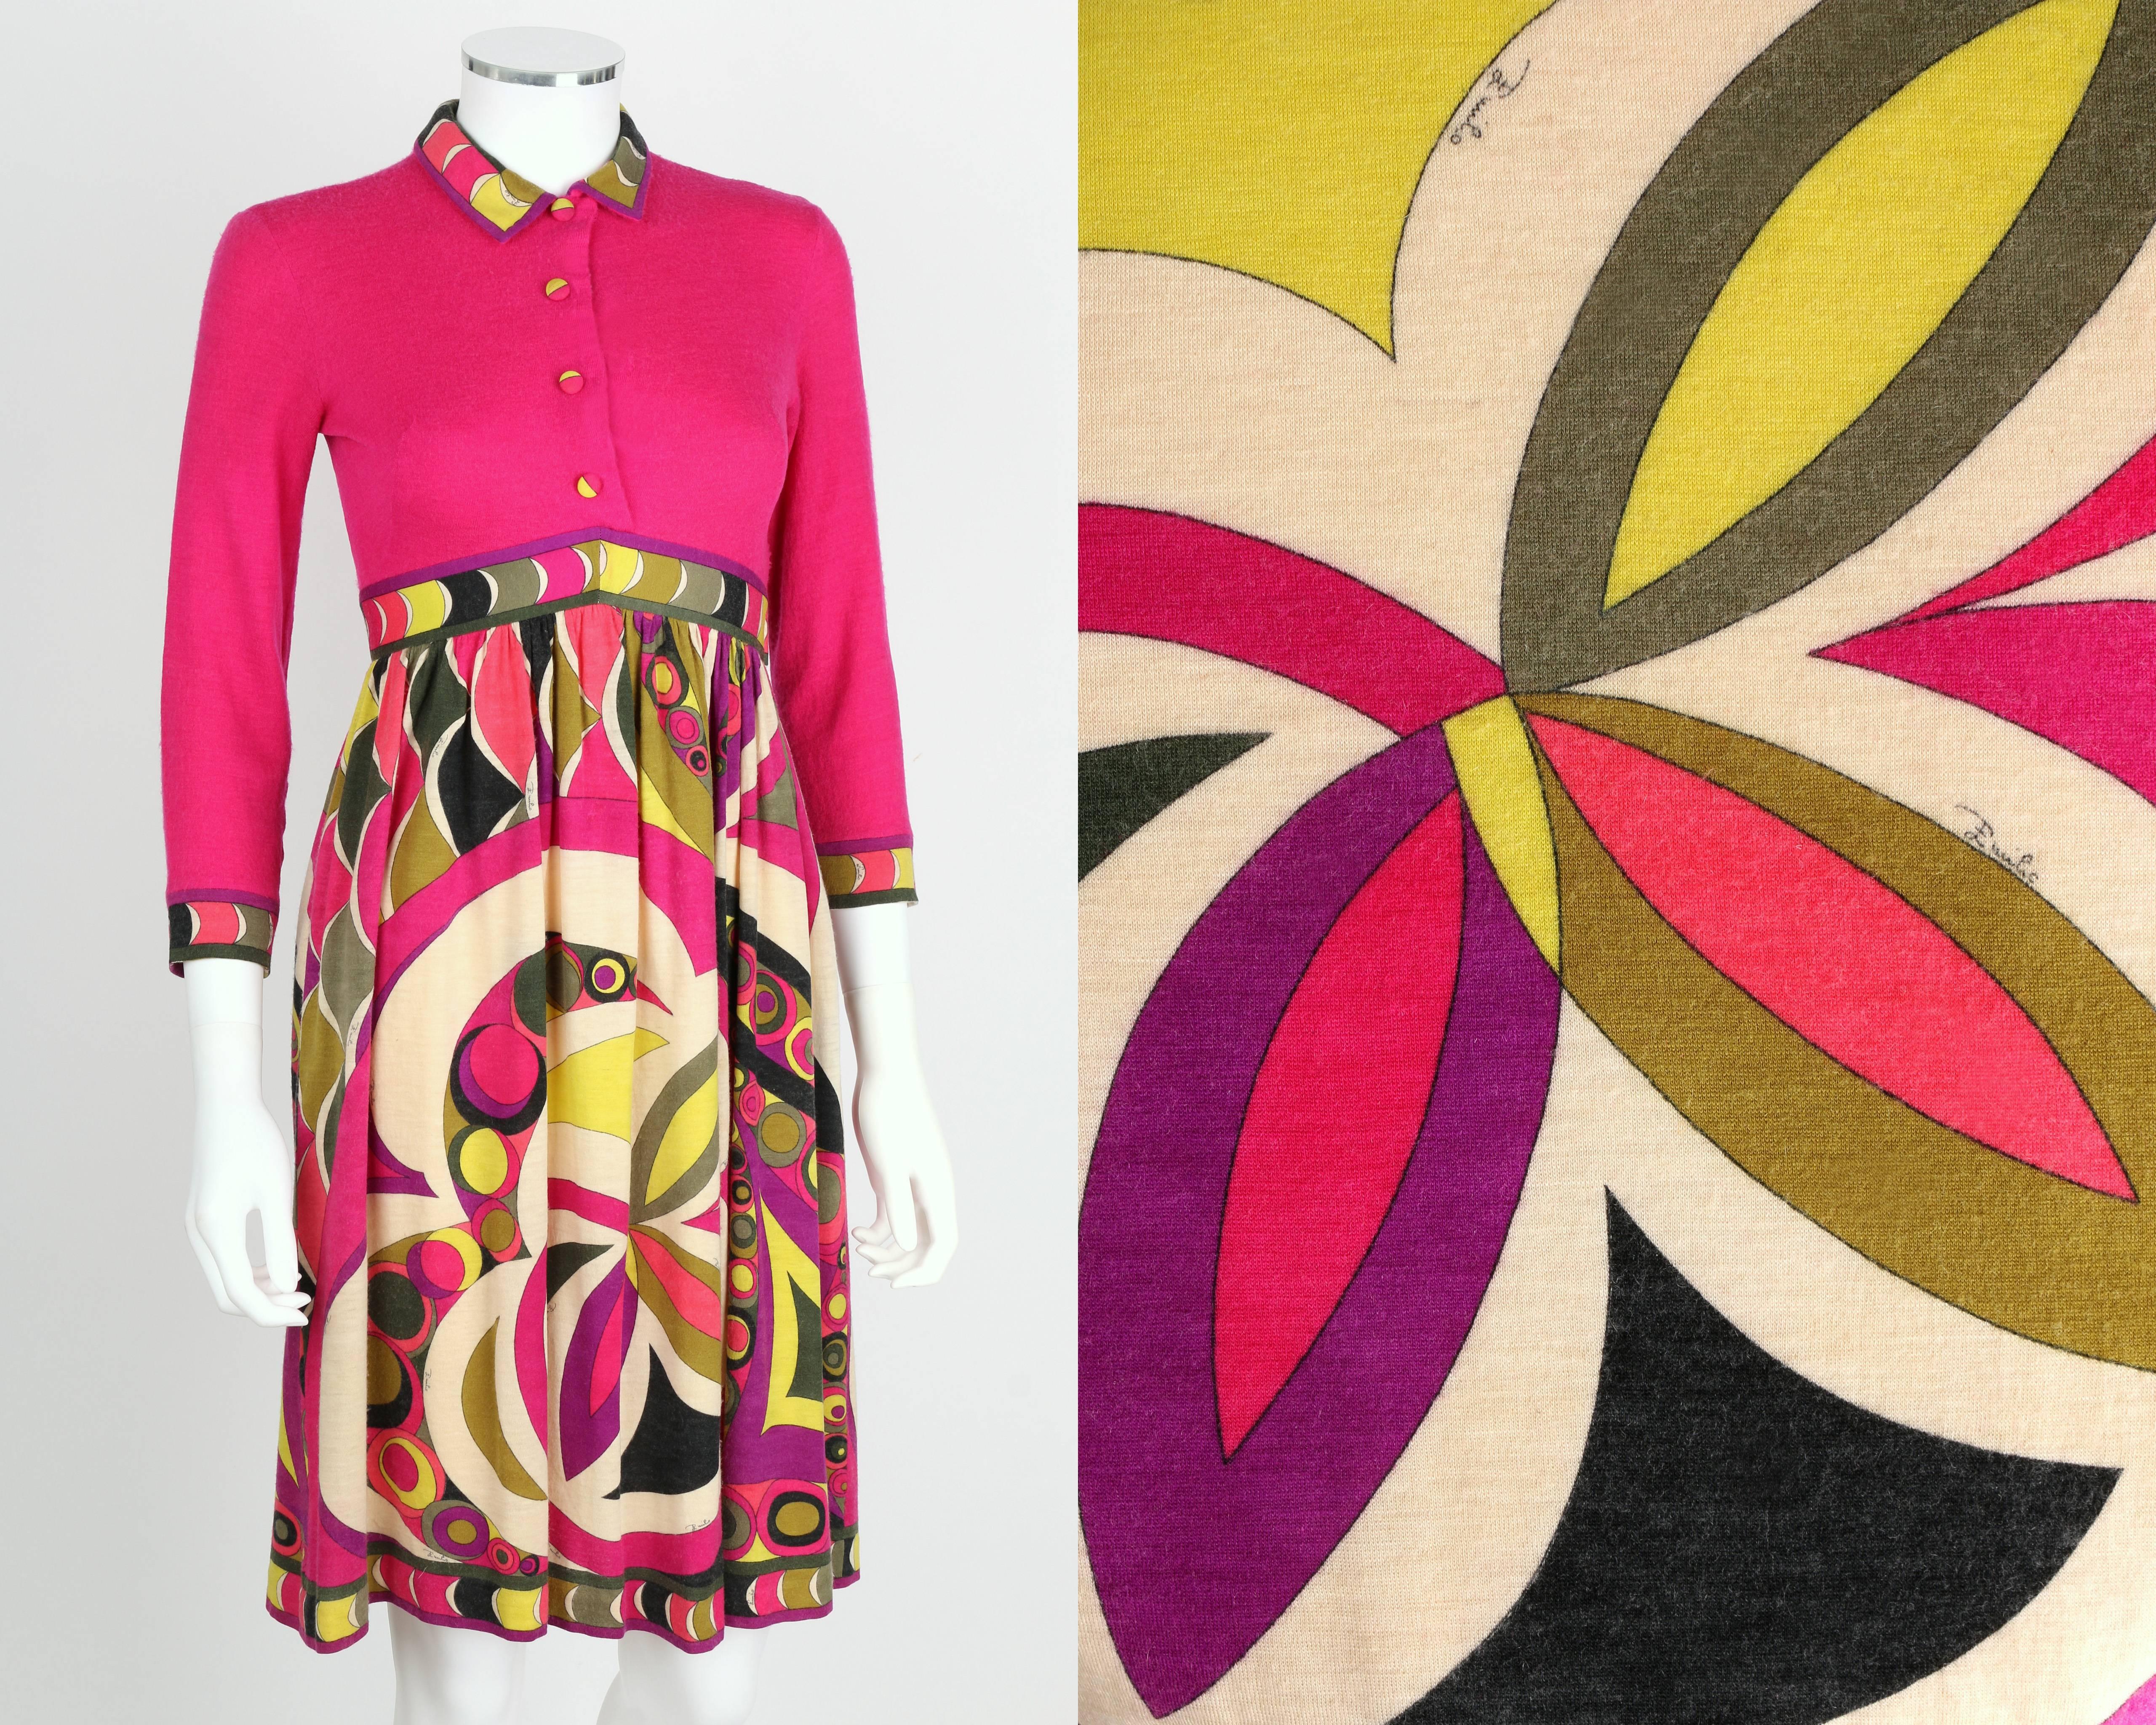 Vintage c.1960's Emilio Pucci for Saks Fifth Avenue cashmere empire waist dress. Magenta bodice with multi-color signature print skirt and decorative border trim. 3/4 length sleeves. Closes at front with concealed snaps. Zips at side. Above the knee